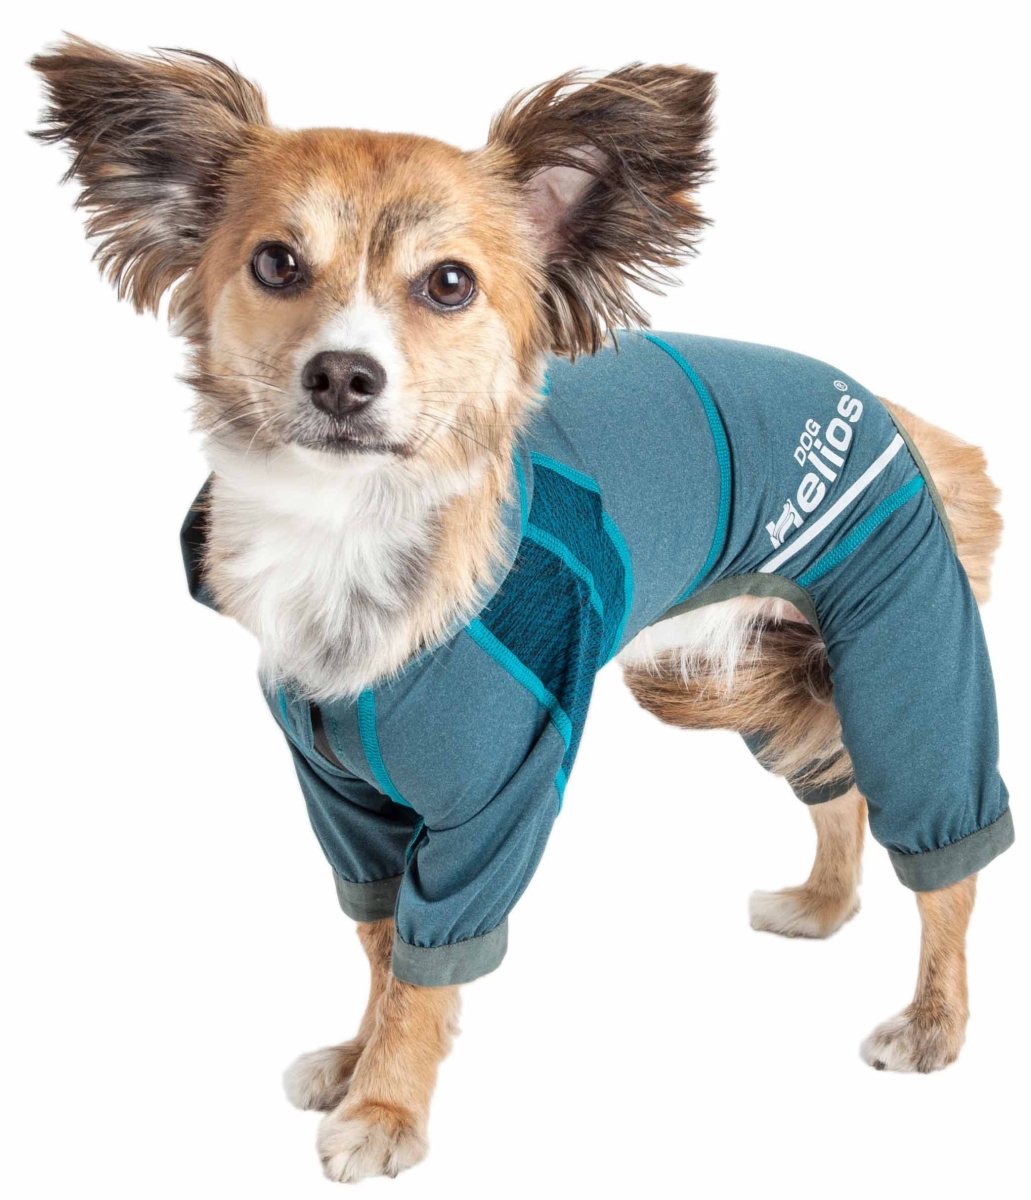 Yghl7tlxl Namastail 4-way Stretch Breathable Full Bodied Performance Yoga Dog Hoodie Tracksuit - Teal & Blue, Extra Large